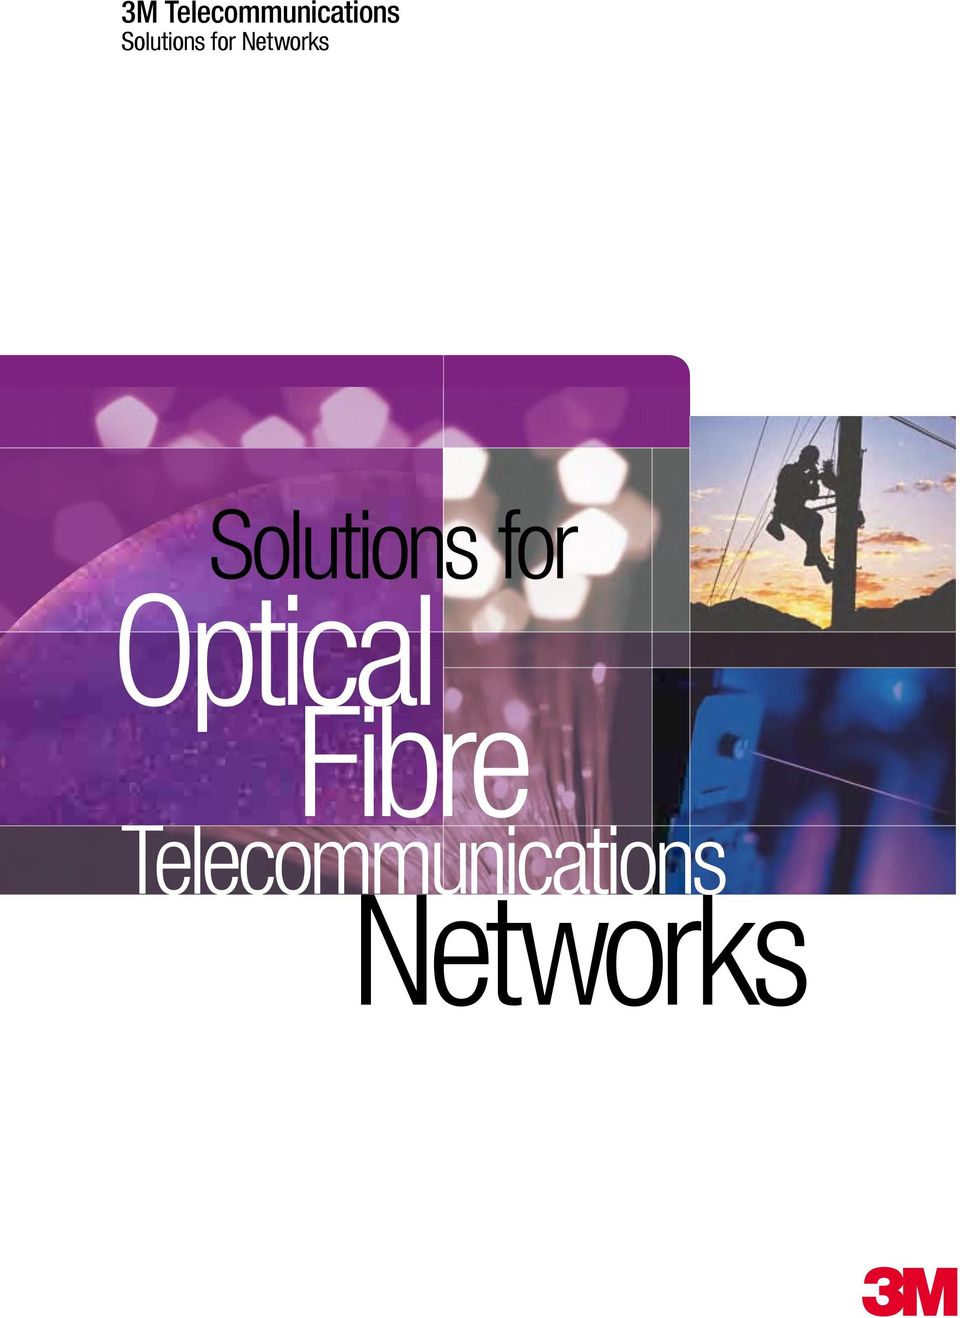 Solutions for Optical